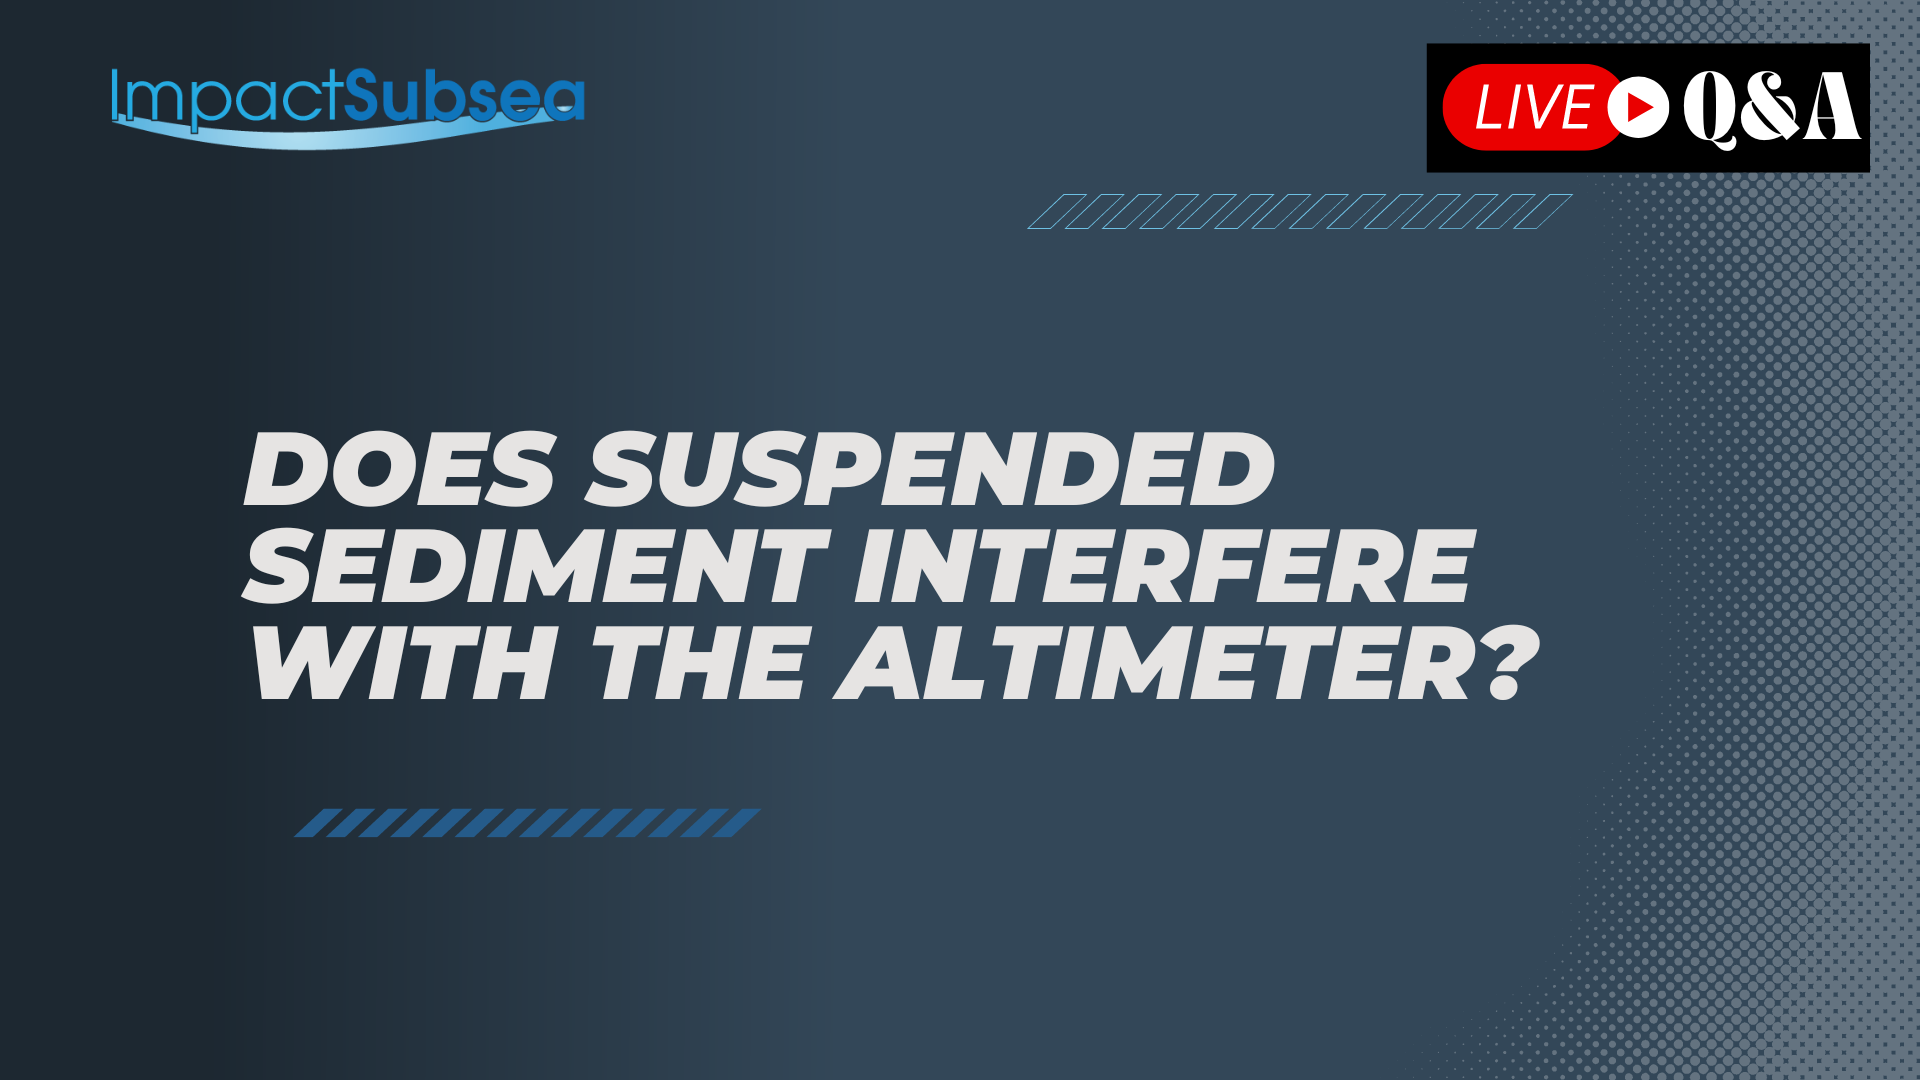 Does suspended sediment interfere with the altimeter?